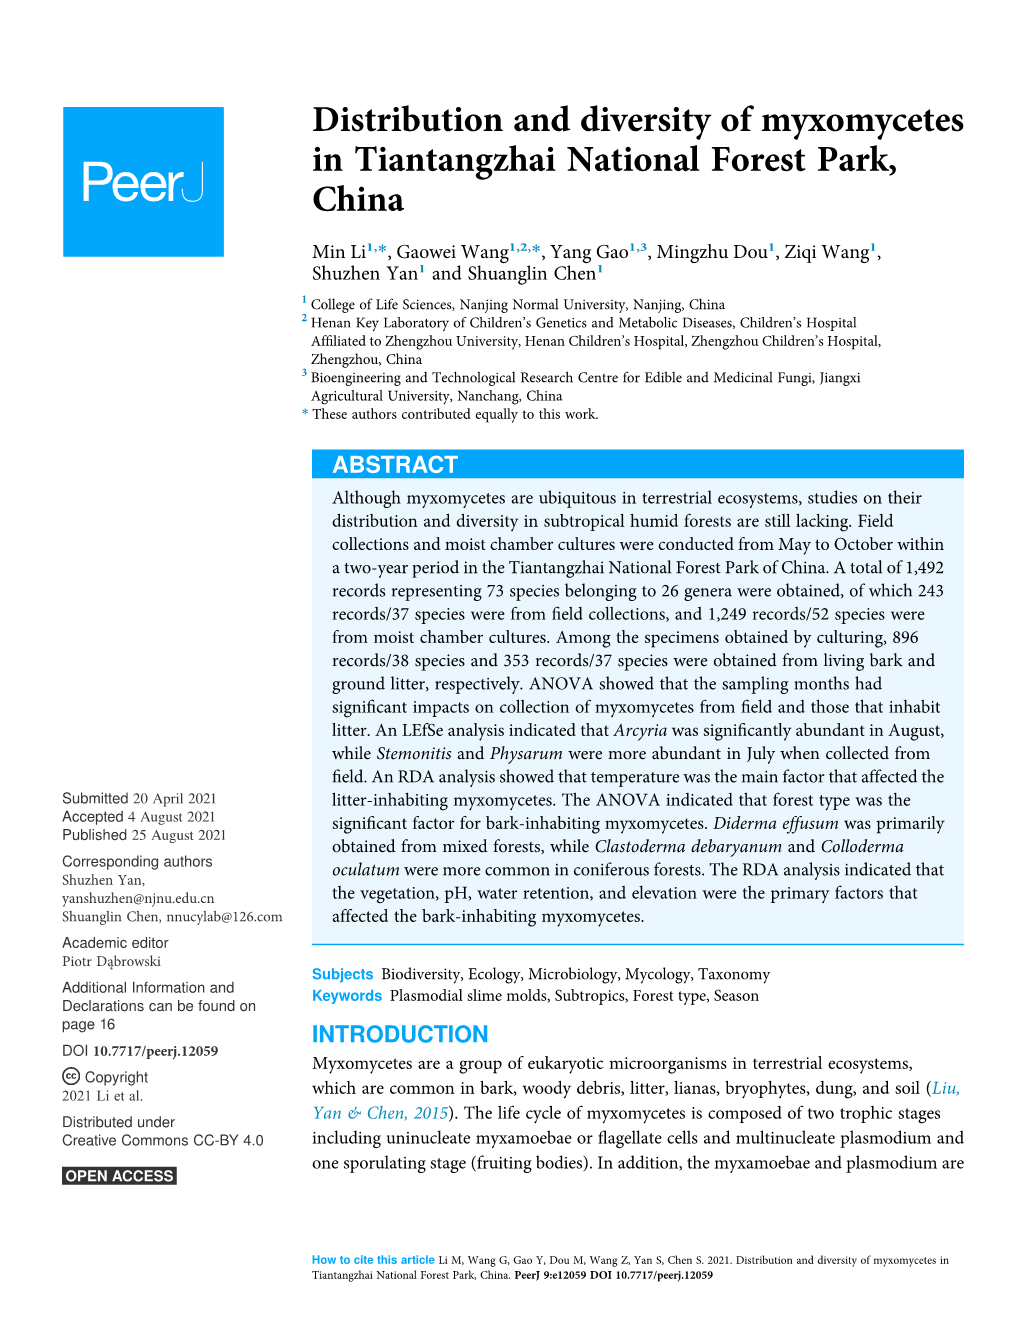 Distribution and Diversity of Myxomycetes in Tiantangzhai National Forest Park, China